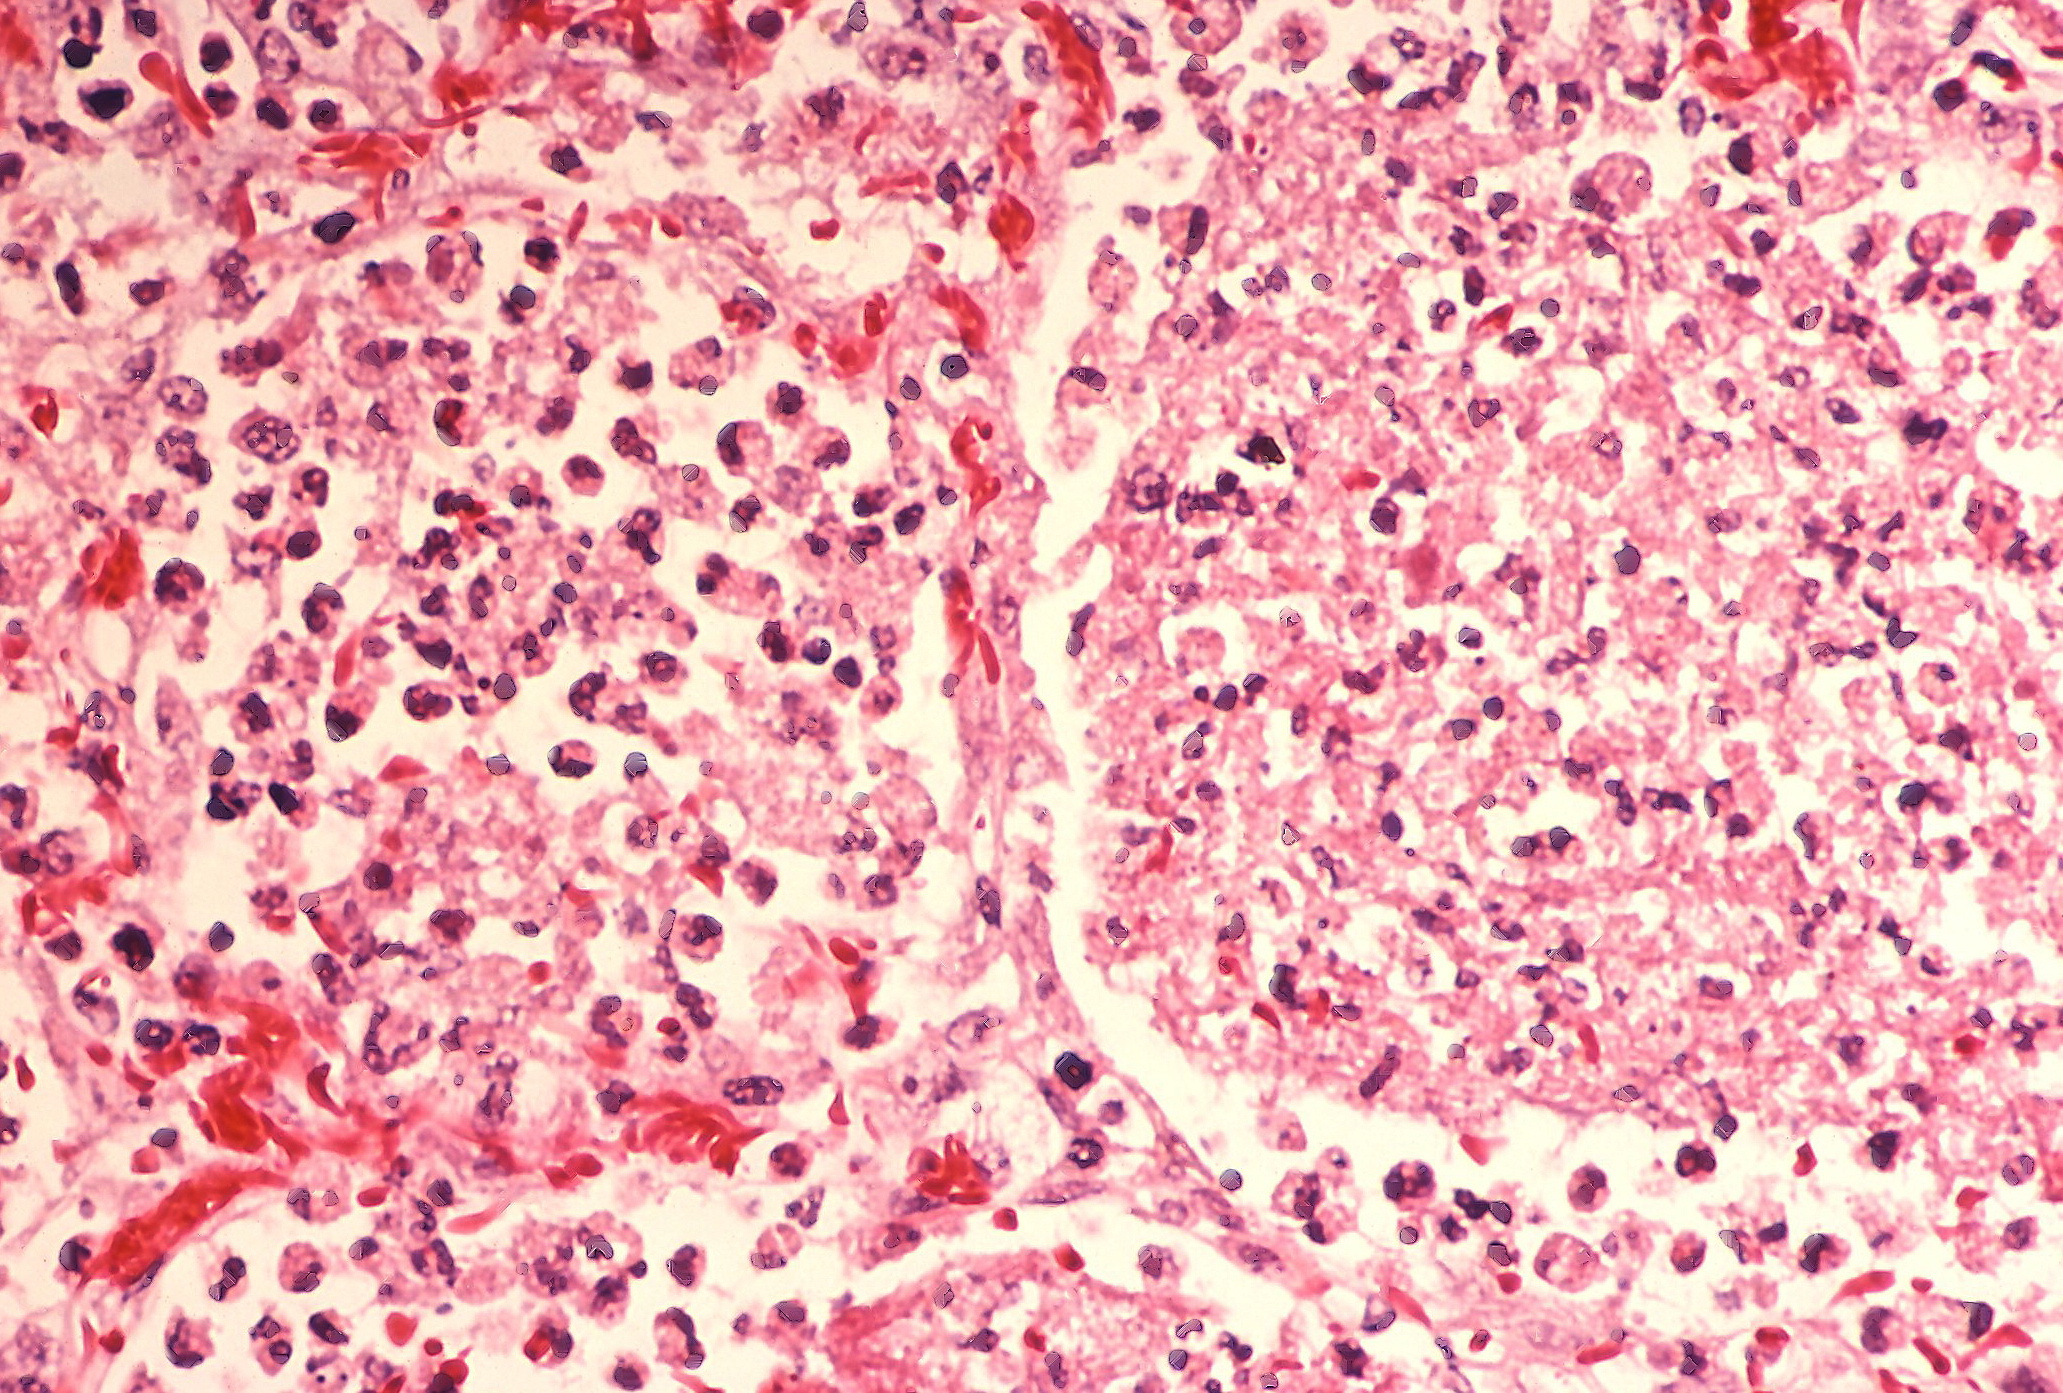 Biopsy of a lung infected by Legionella bacteria